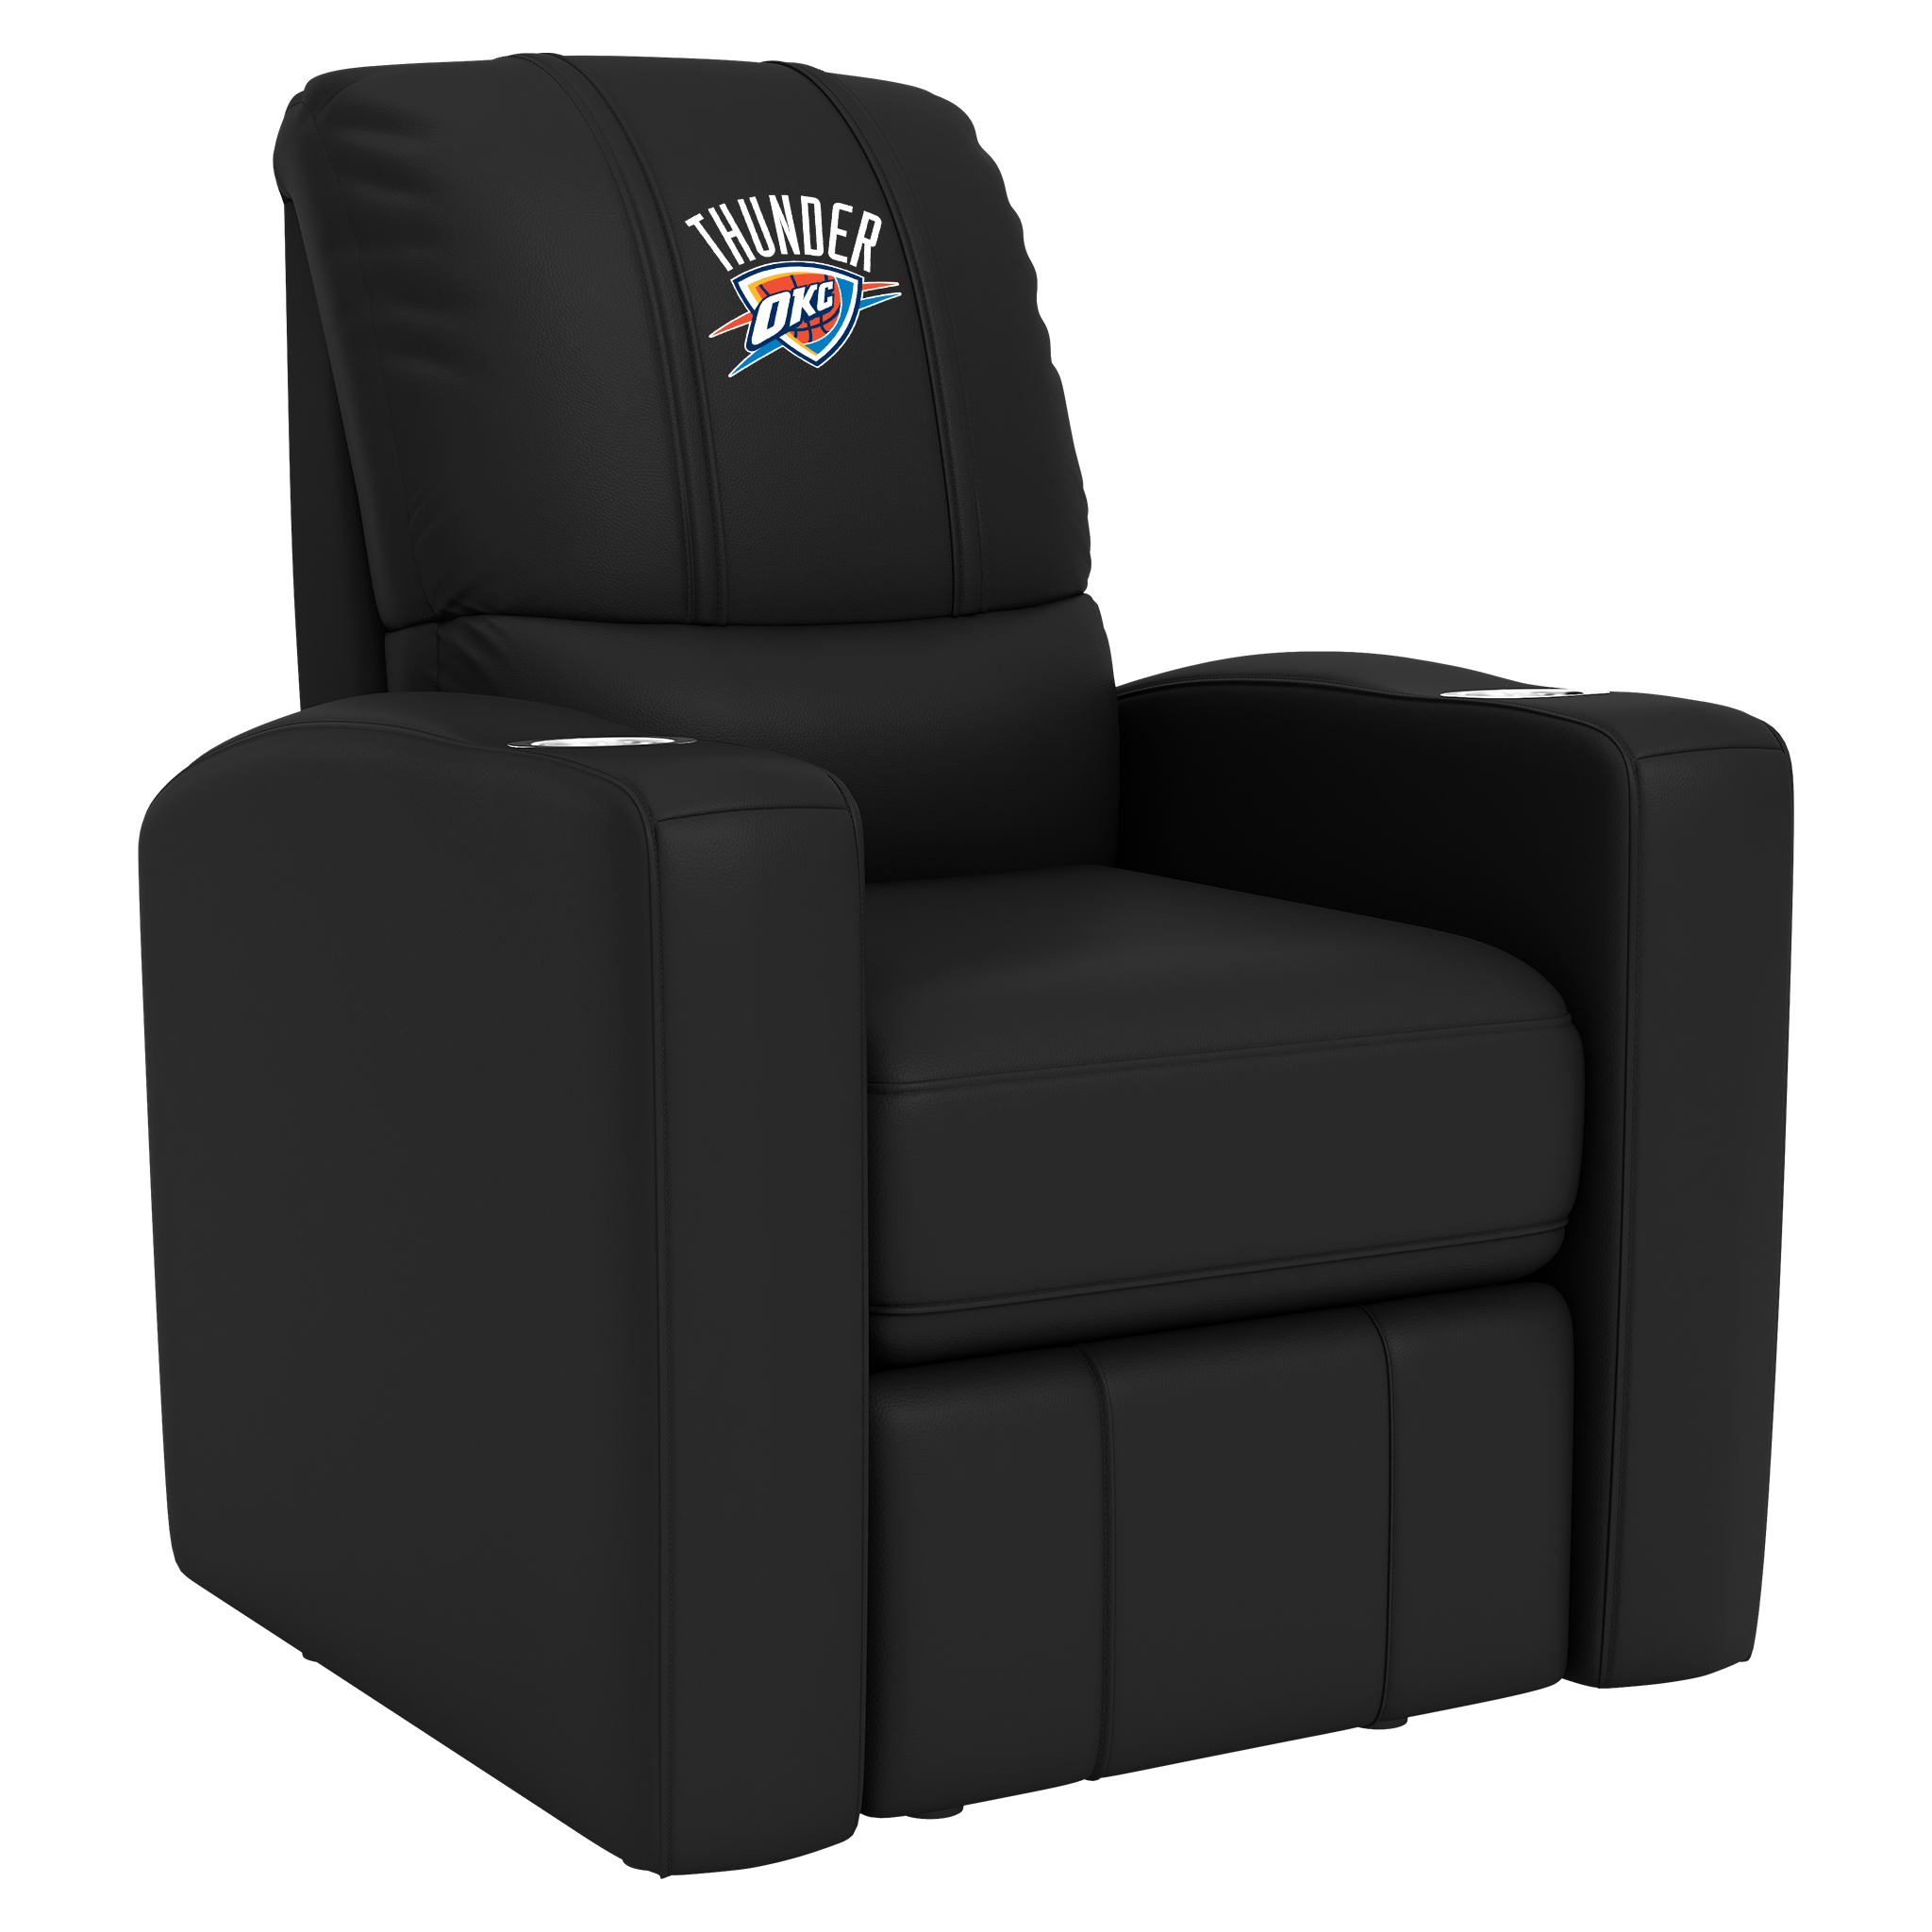 Oklahoma City Thunder Stealth Recliner with Oklahoma City Thunder Logo